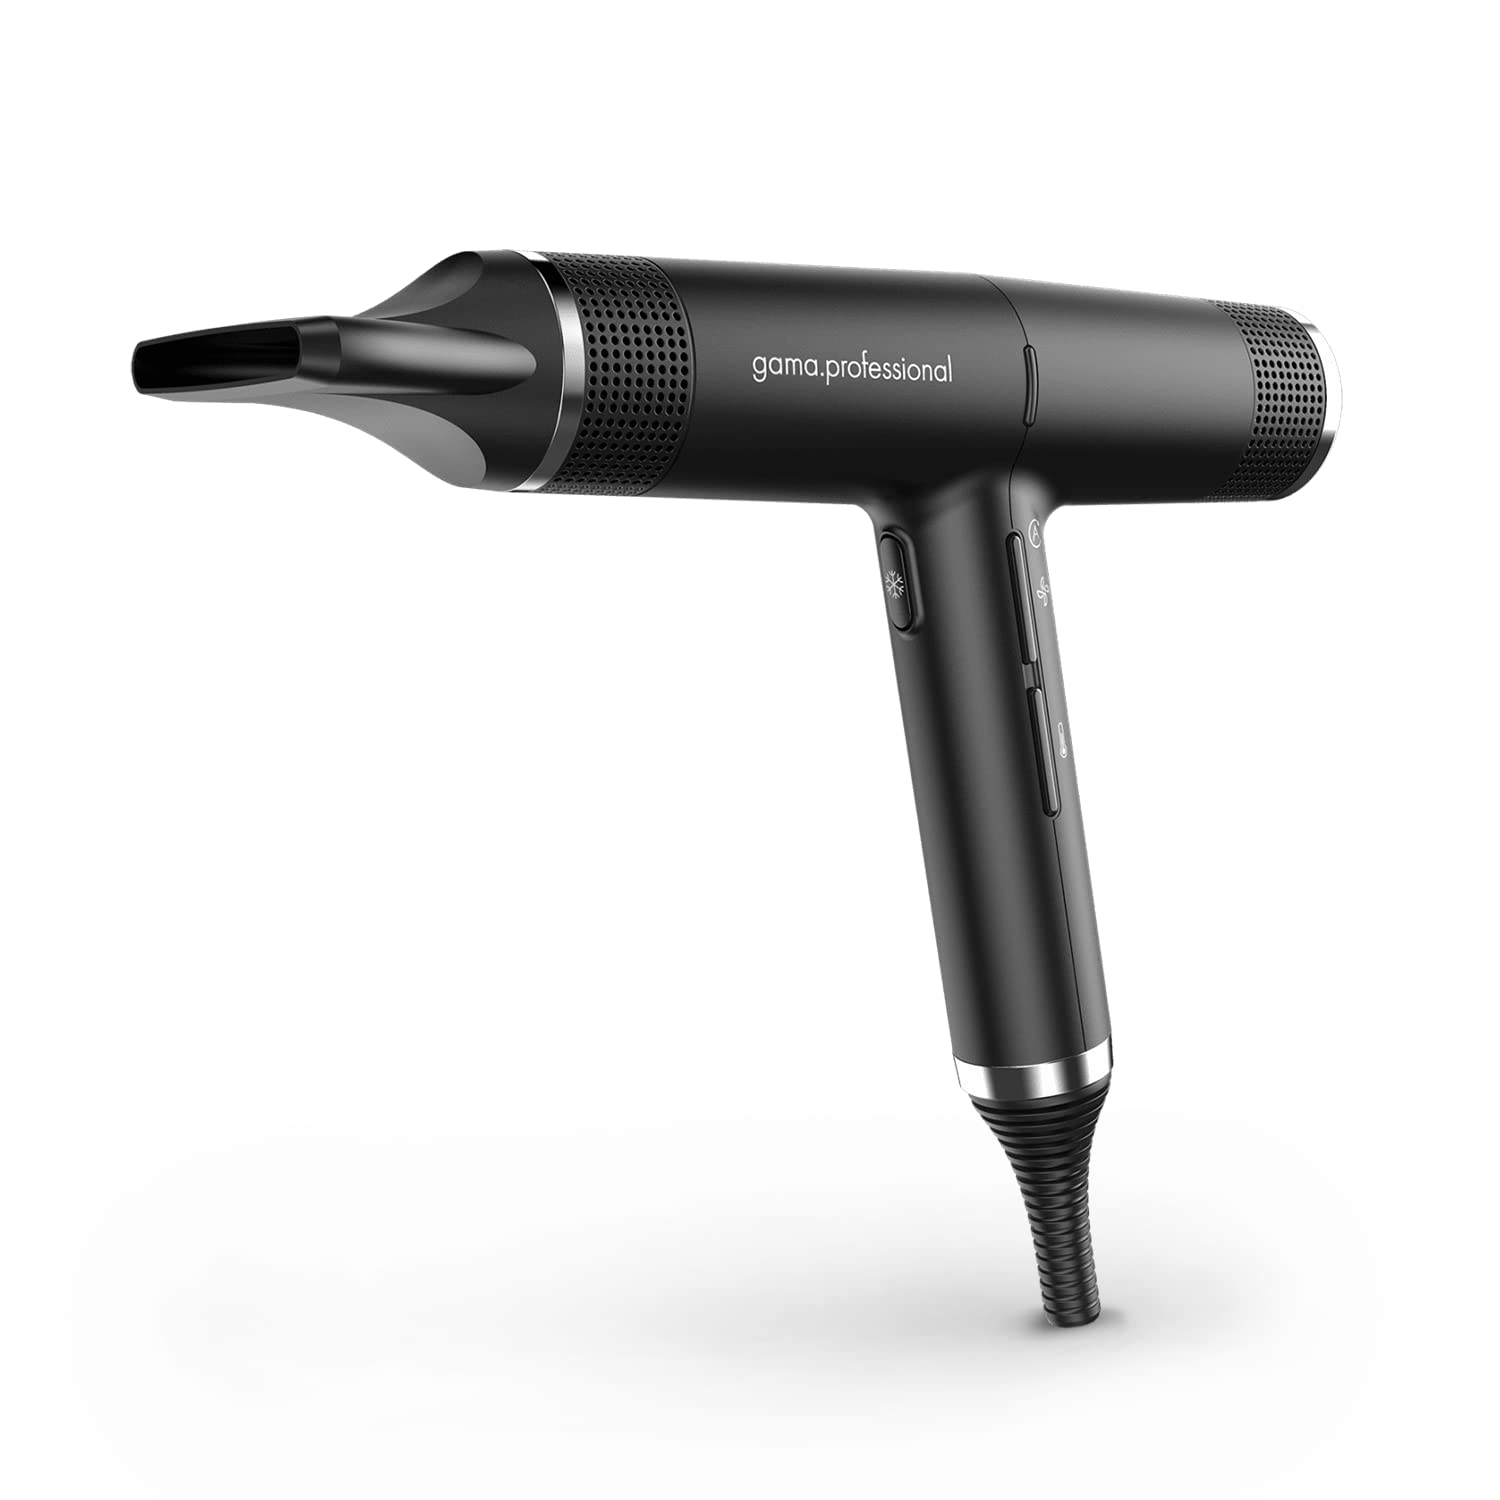 How To Clean Gama Professional Hair Dryer